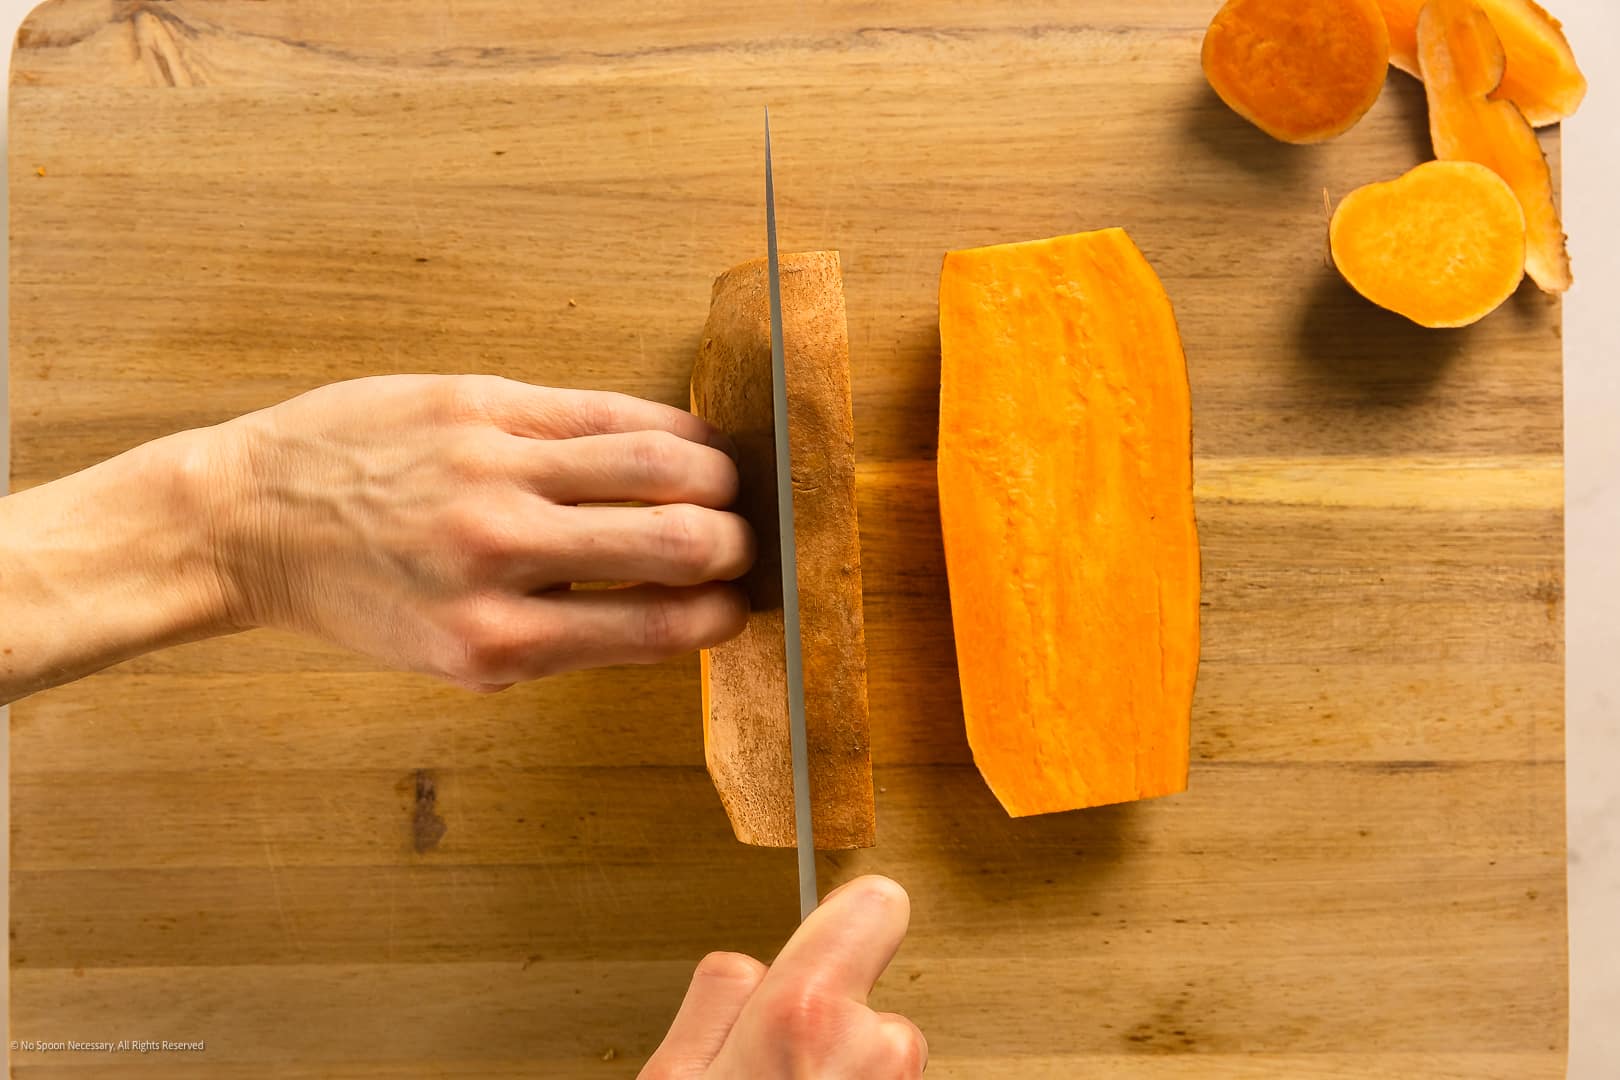 The Ultimate Guide to Cutting Vegetables